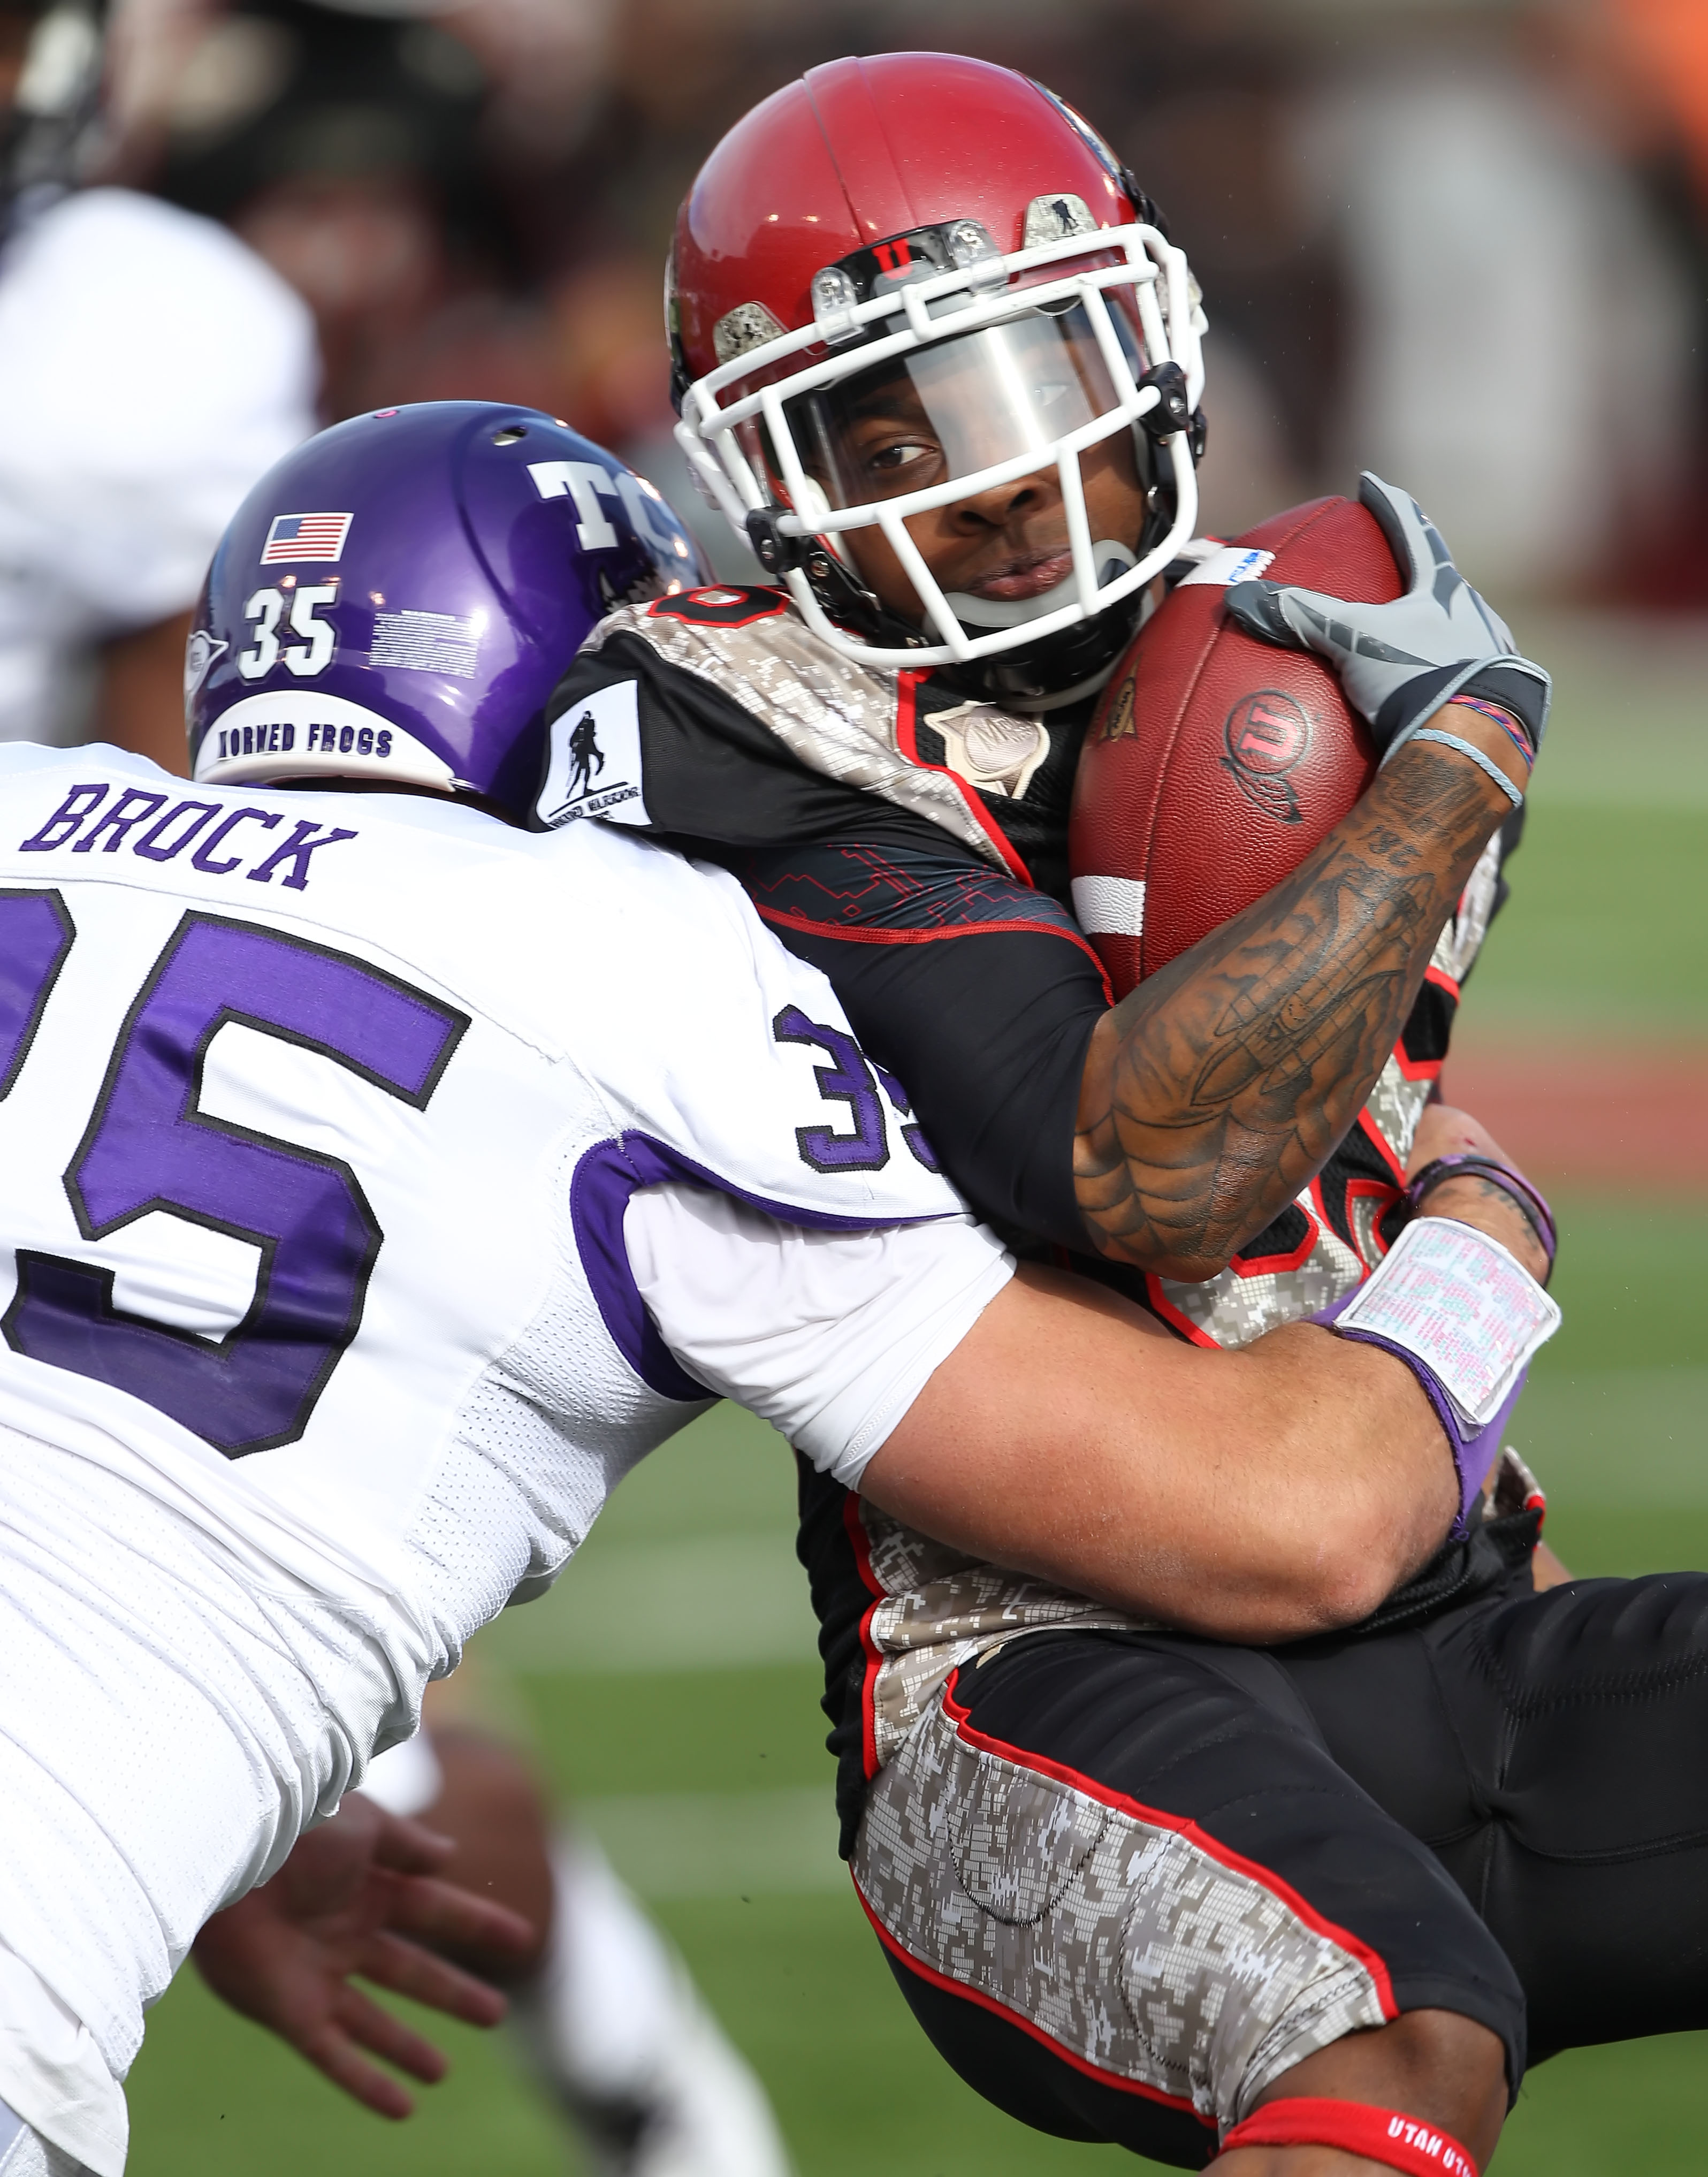 SALT LAKE CITY, UT - NOVEMBER 6: Jereme Brooks #85 of the Utah Utes is hit by Tanner Brock #35 of the TCU Horned Frogs during the first half of an NCAA football game November 6, 2010 at Rice-Eccles Stadium in Salt Lake City, Utah. (Photo by George Frey/Ge